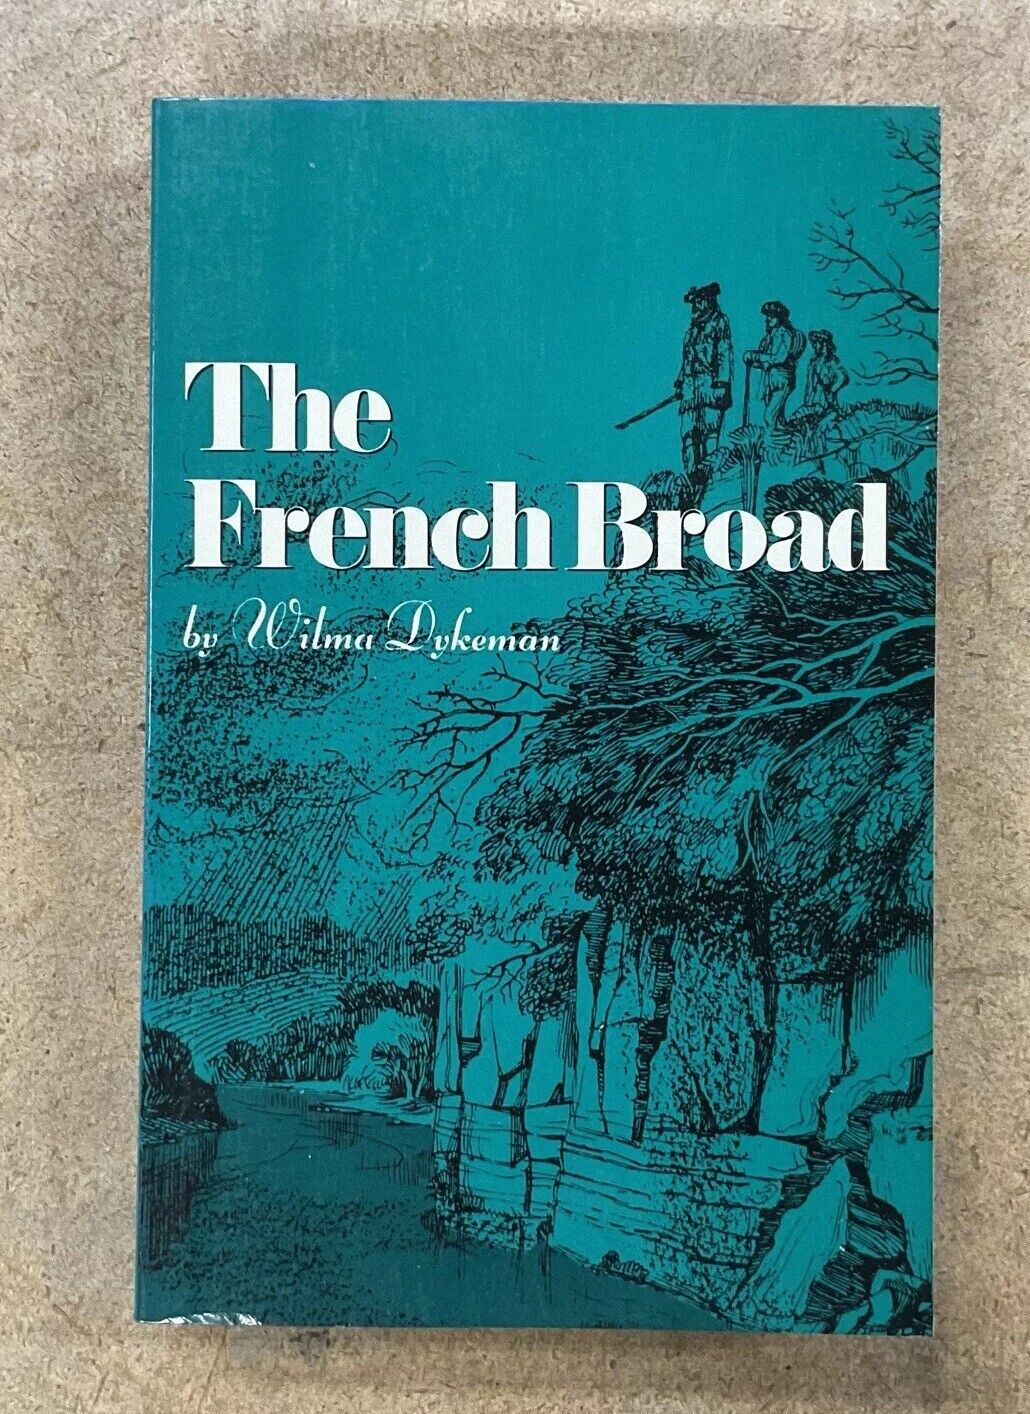 French Broad by Wilma Dykeman SC 1985 University of Tennessee Press